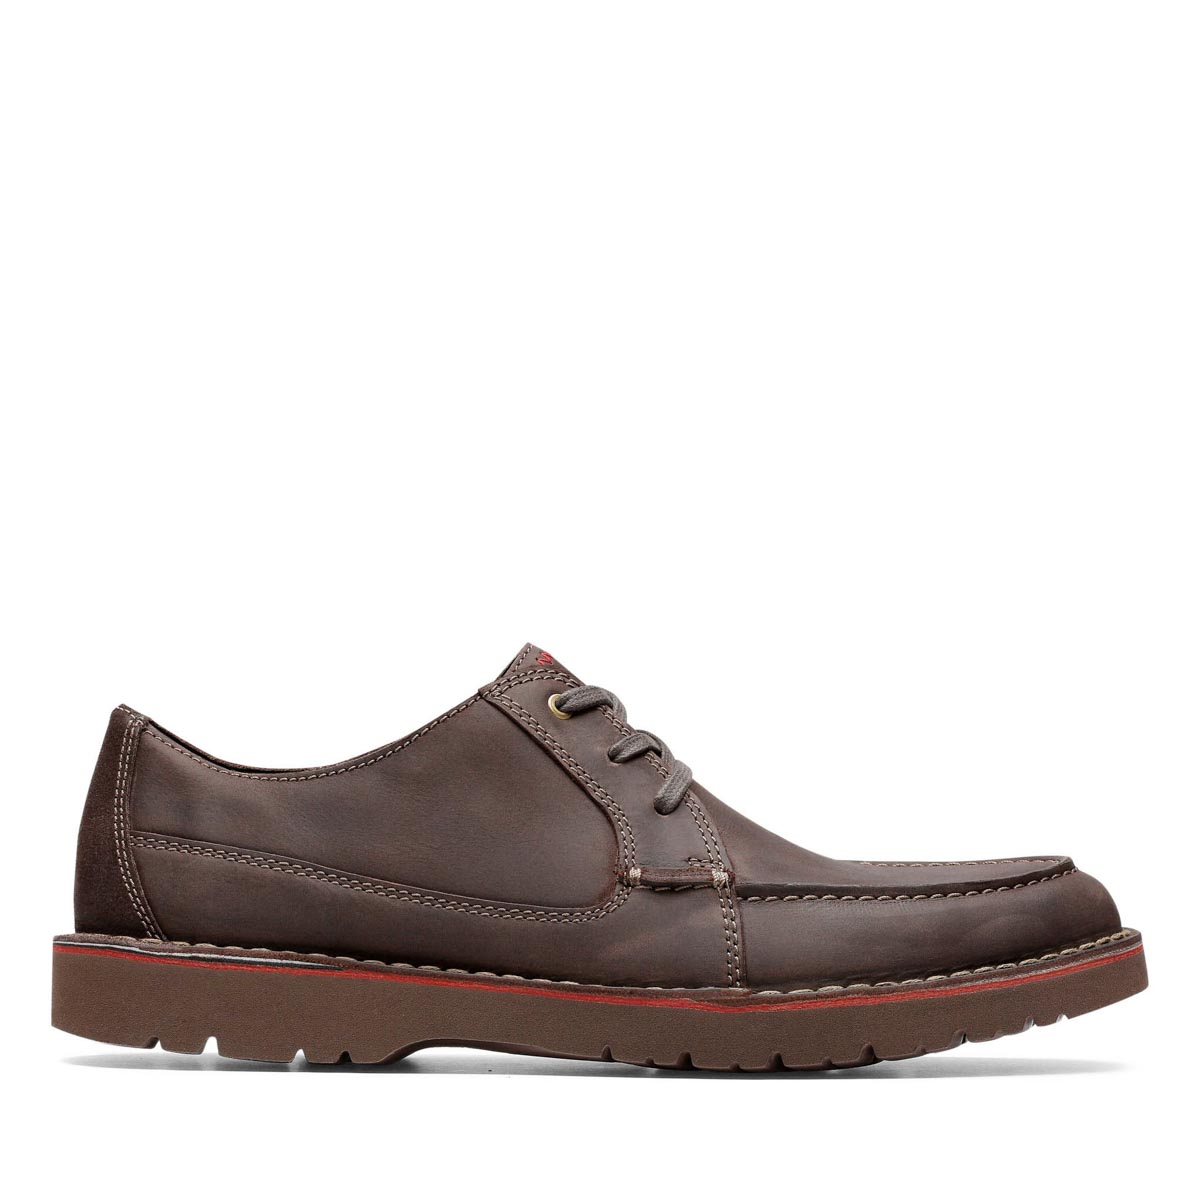 clarks shoes at